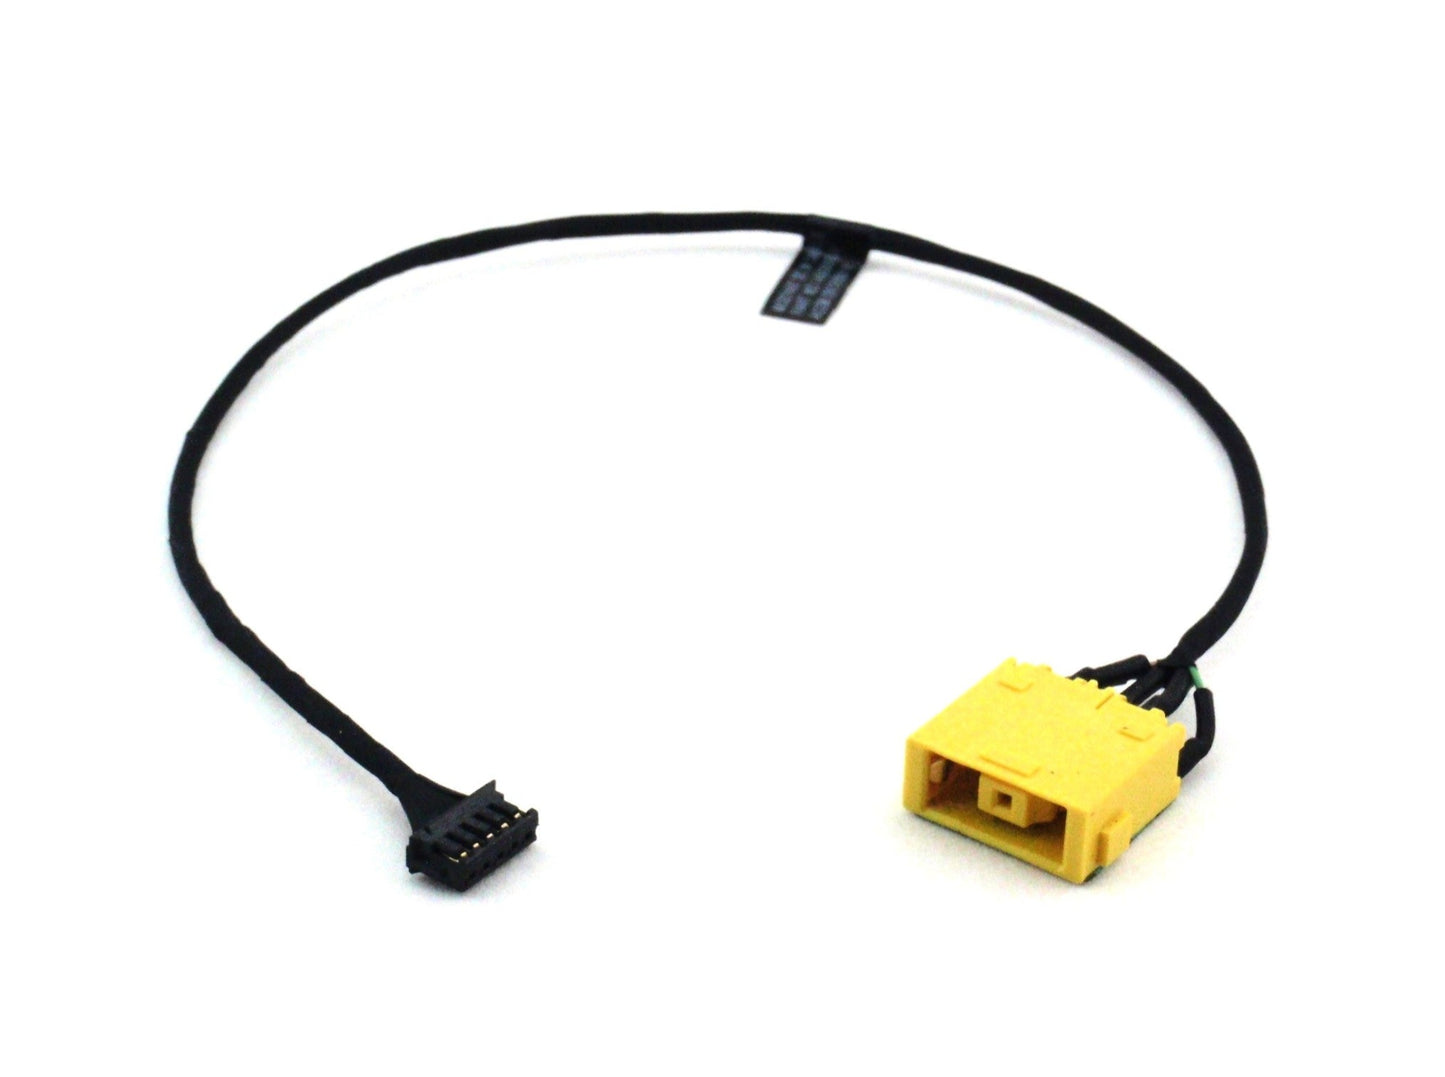 Lenovo New DC In Power Jack Charging Port Connector Cable VENUS IdeaPad UltraBook Yoga 13 145500058 11201285 145500057